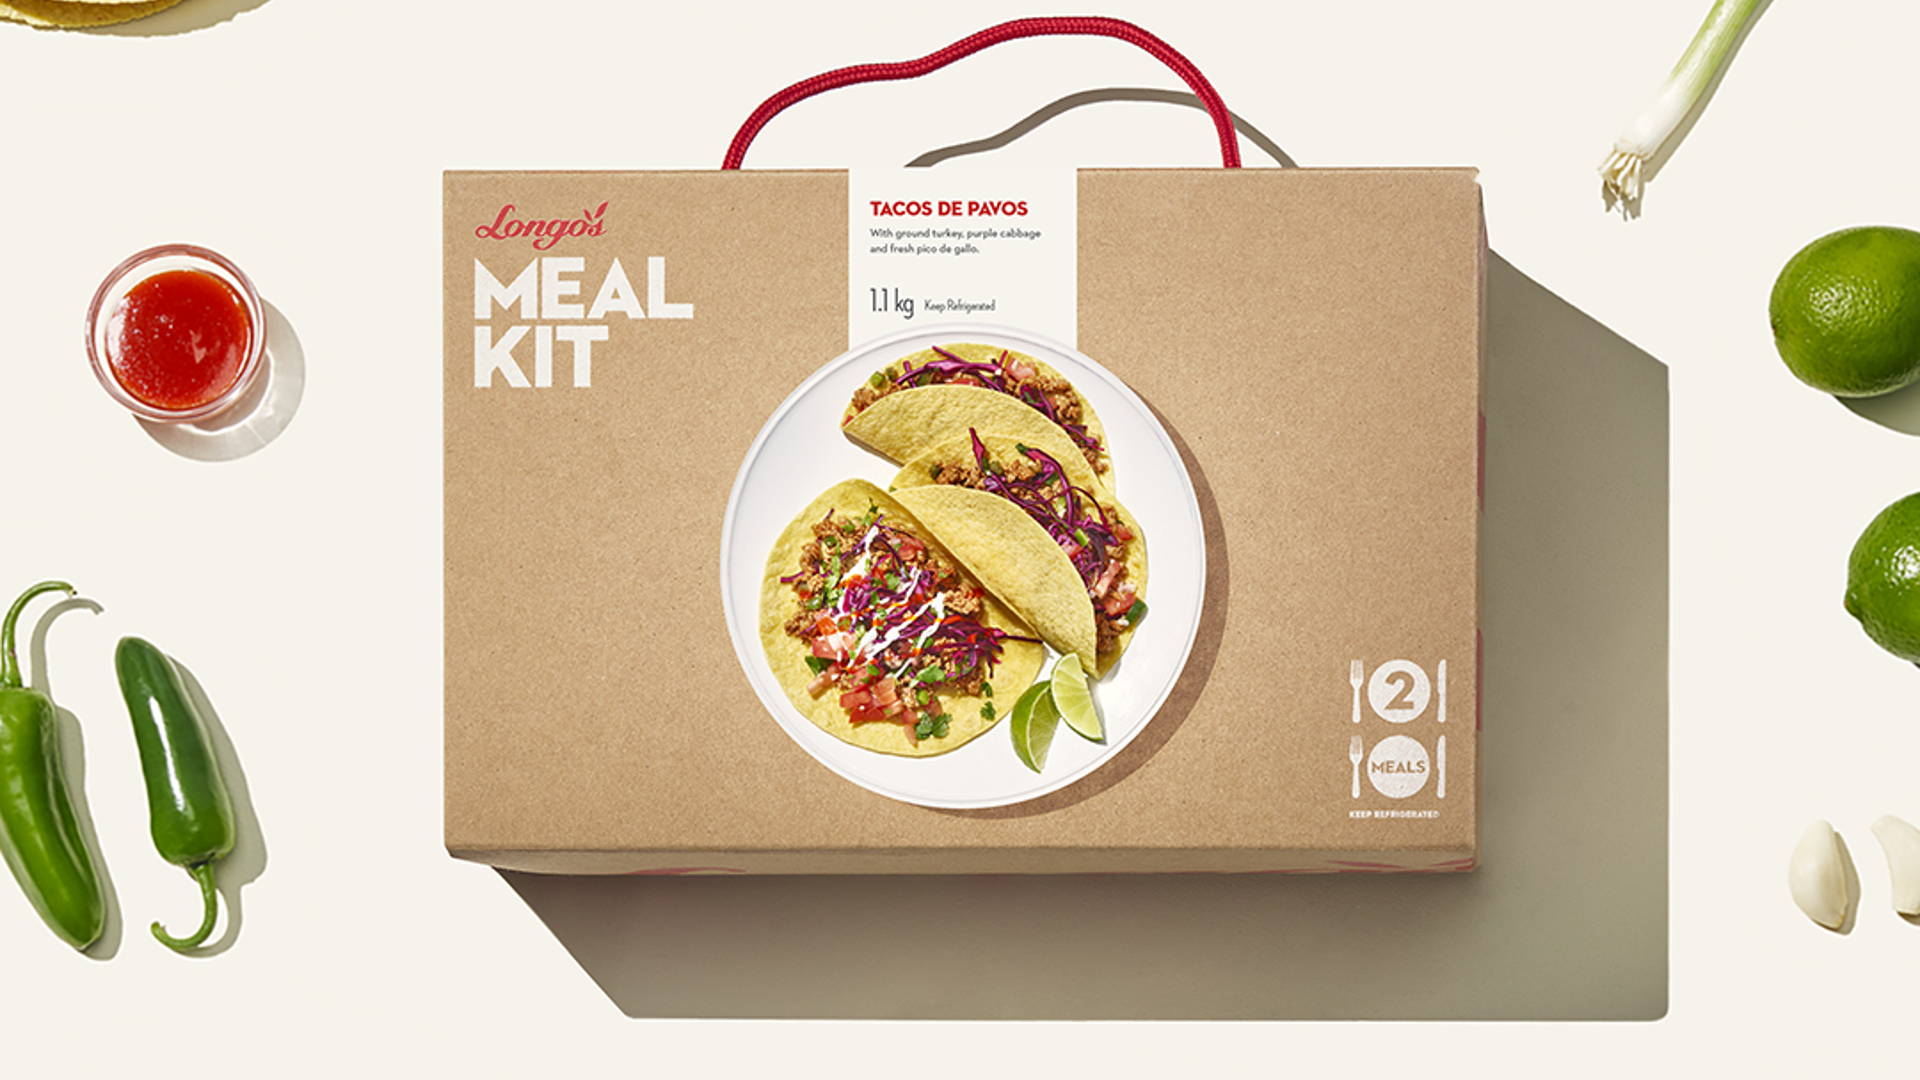 Featured image for A Fresh Take on Meal Kit Packaging Helps This Brand Stand Out